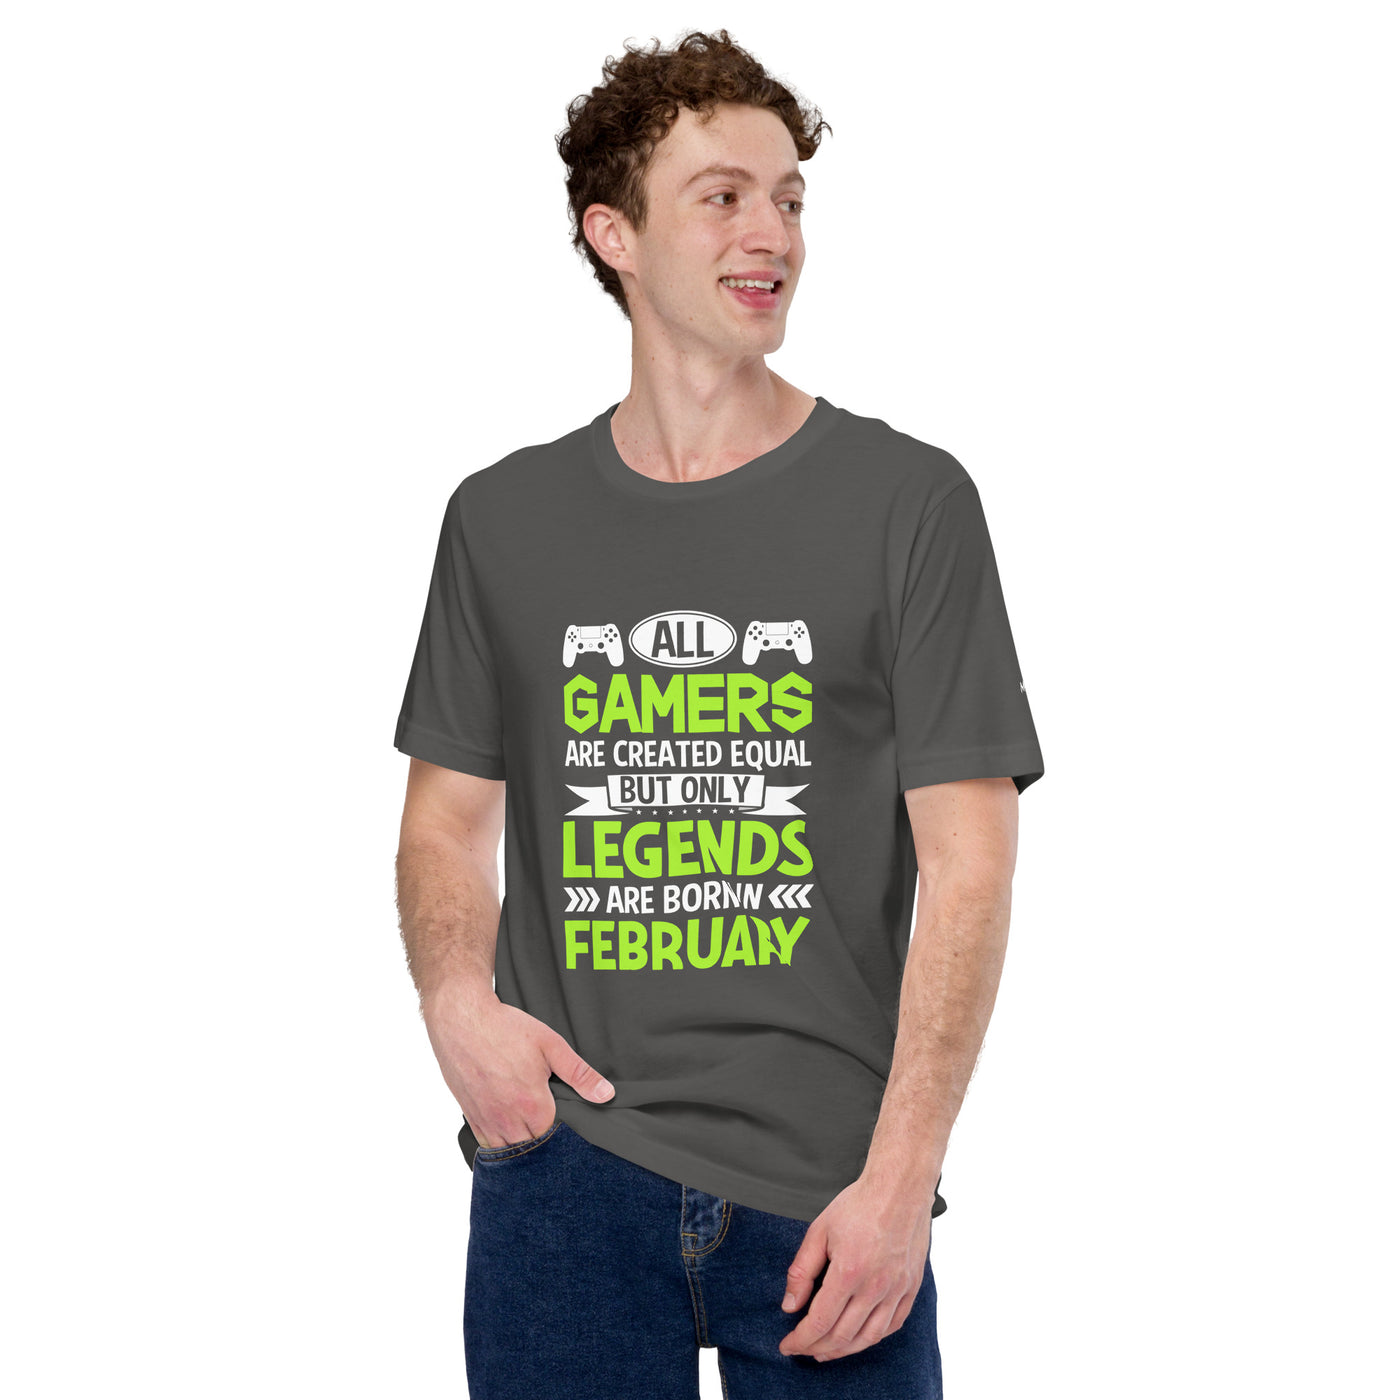 All Gamers are created equal - Unisex t-shirt